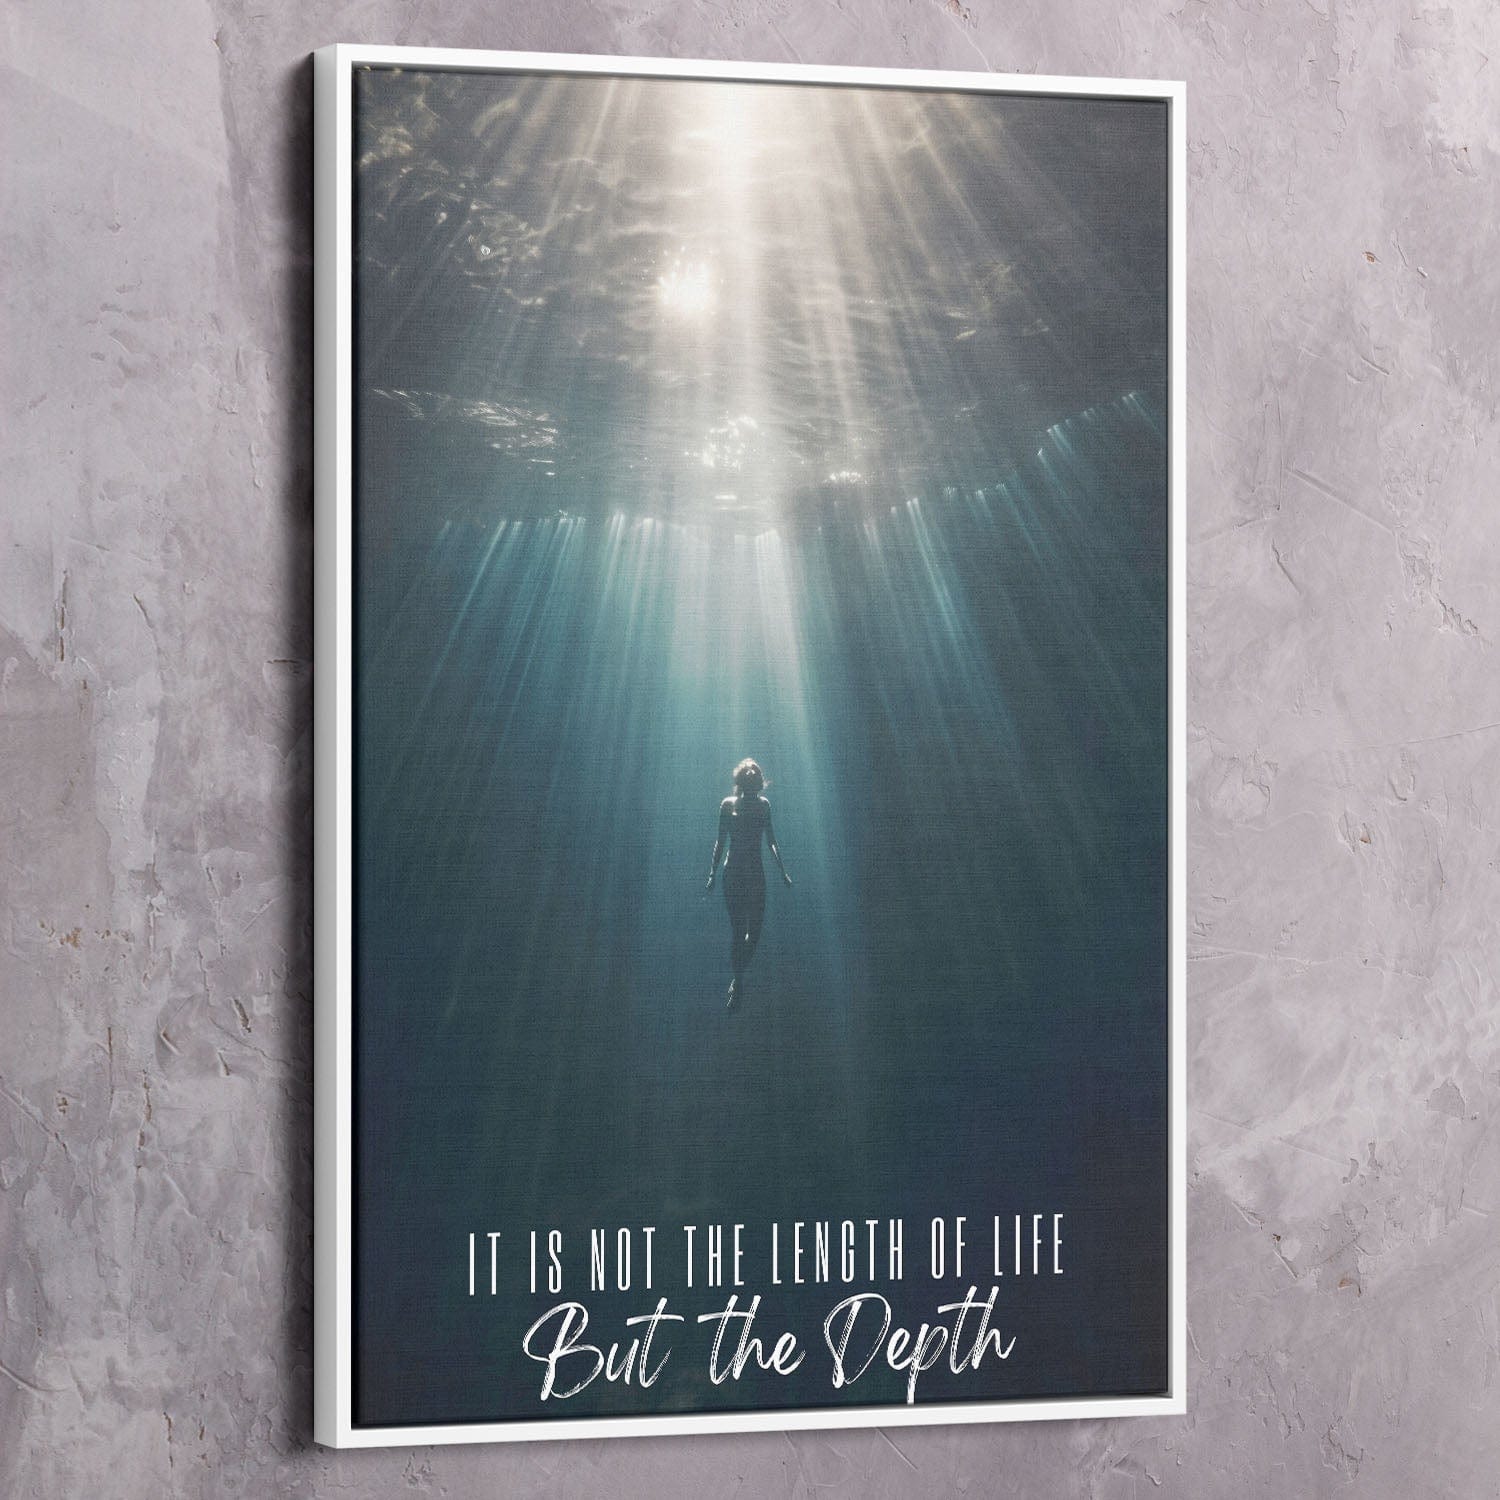 Underwater - It is not the length of life but the depth - Ralph Waldo Emerson Quote Wall Art | Inspirational Wall Art Motivational Wall Art Quotes Office Art | ImpaktMaker Exclusive Canvas Art Portrait